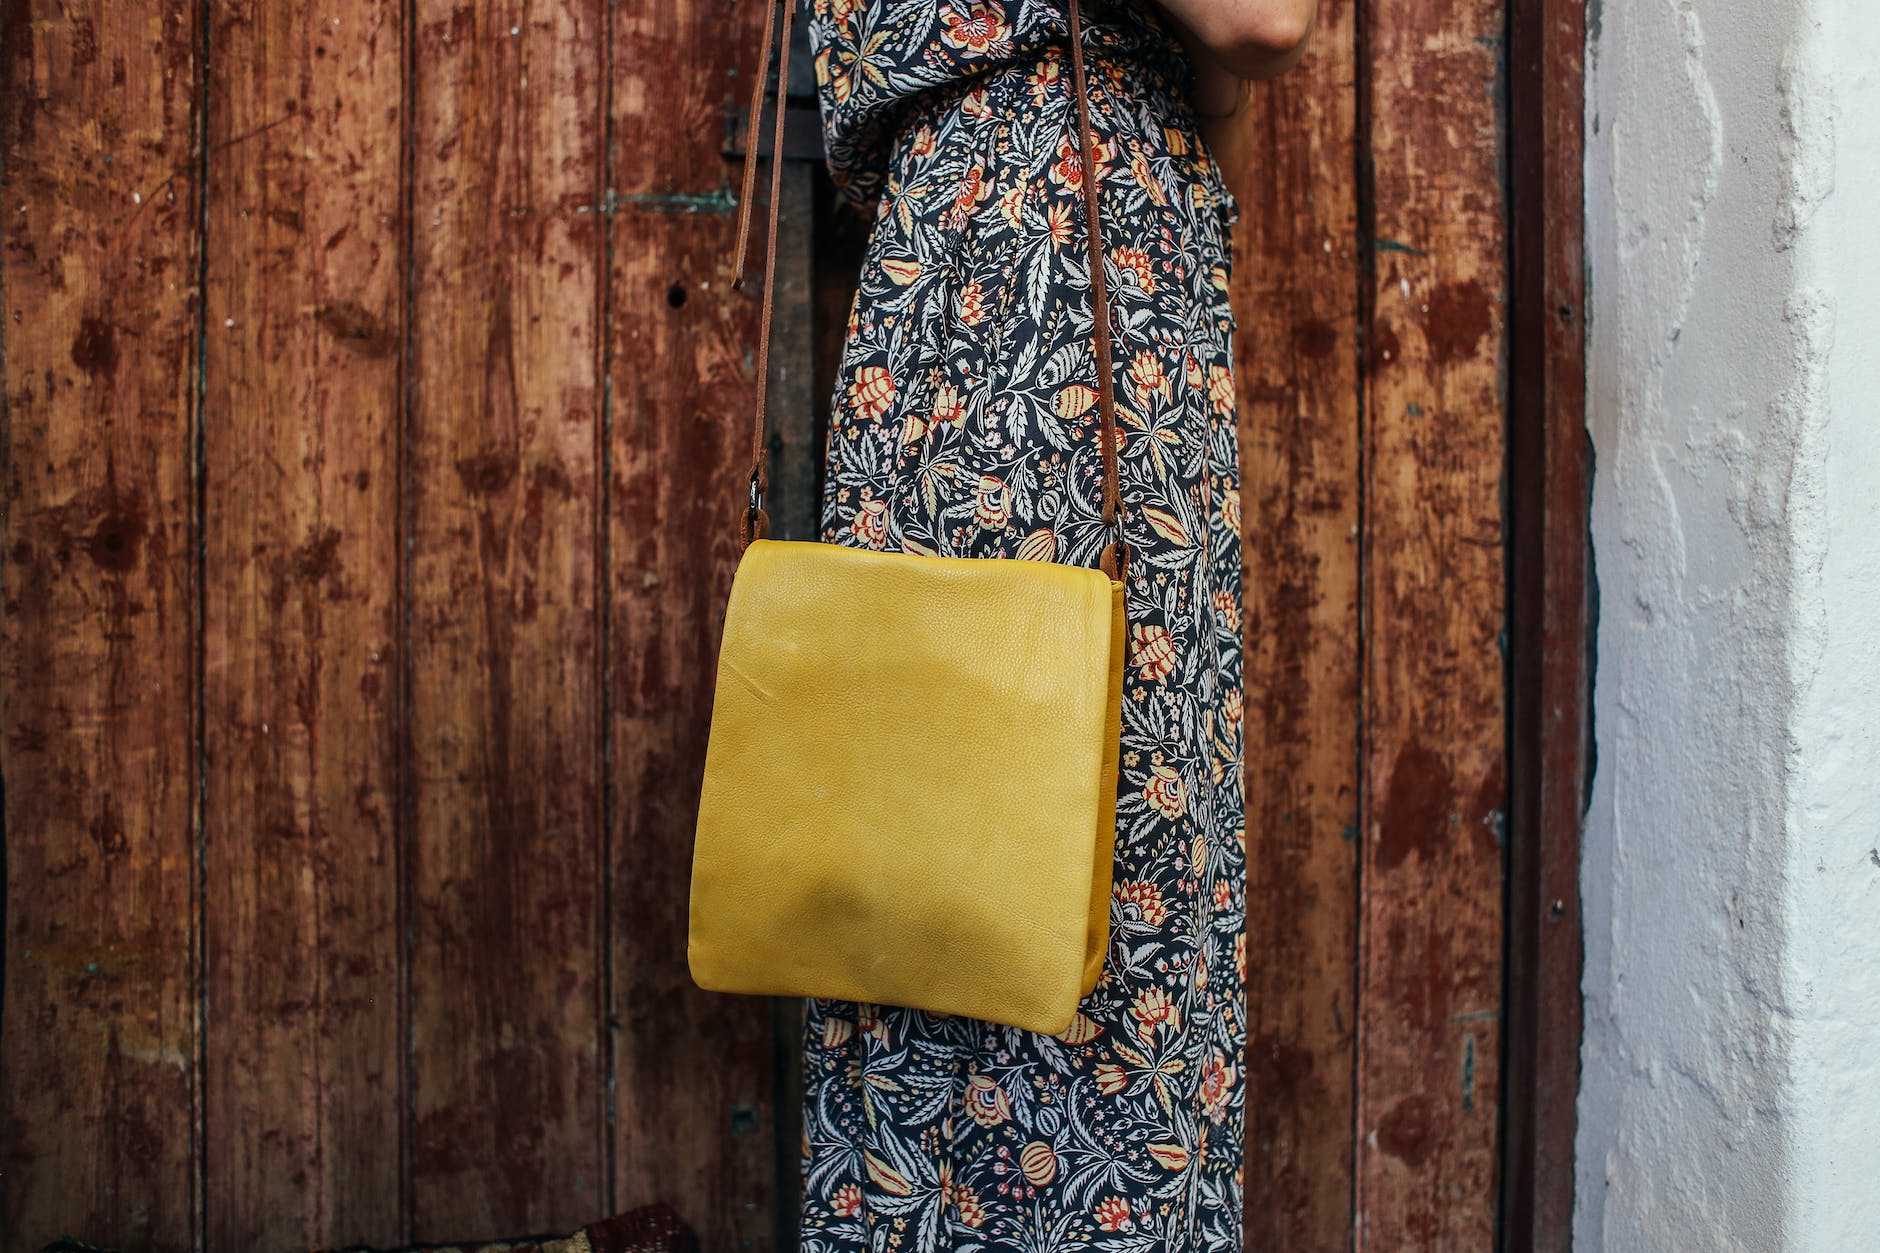 person in floral dress with yellow shoulder bag